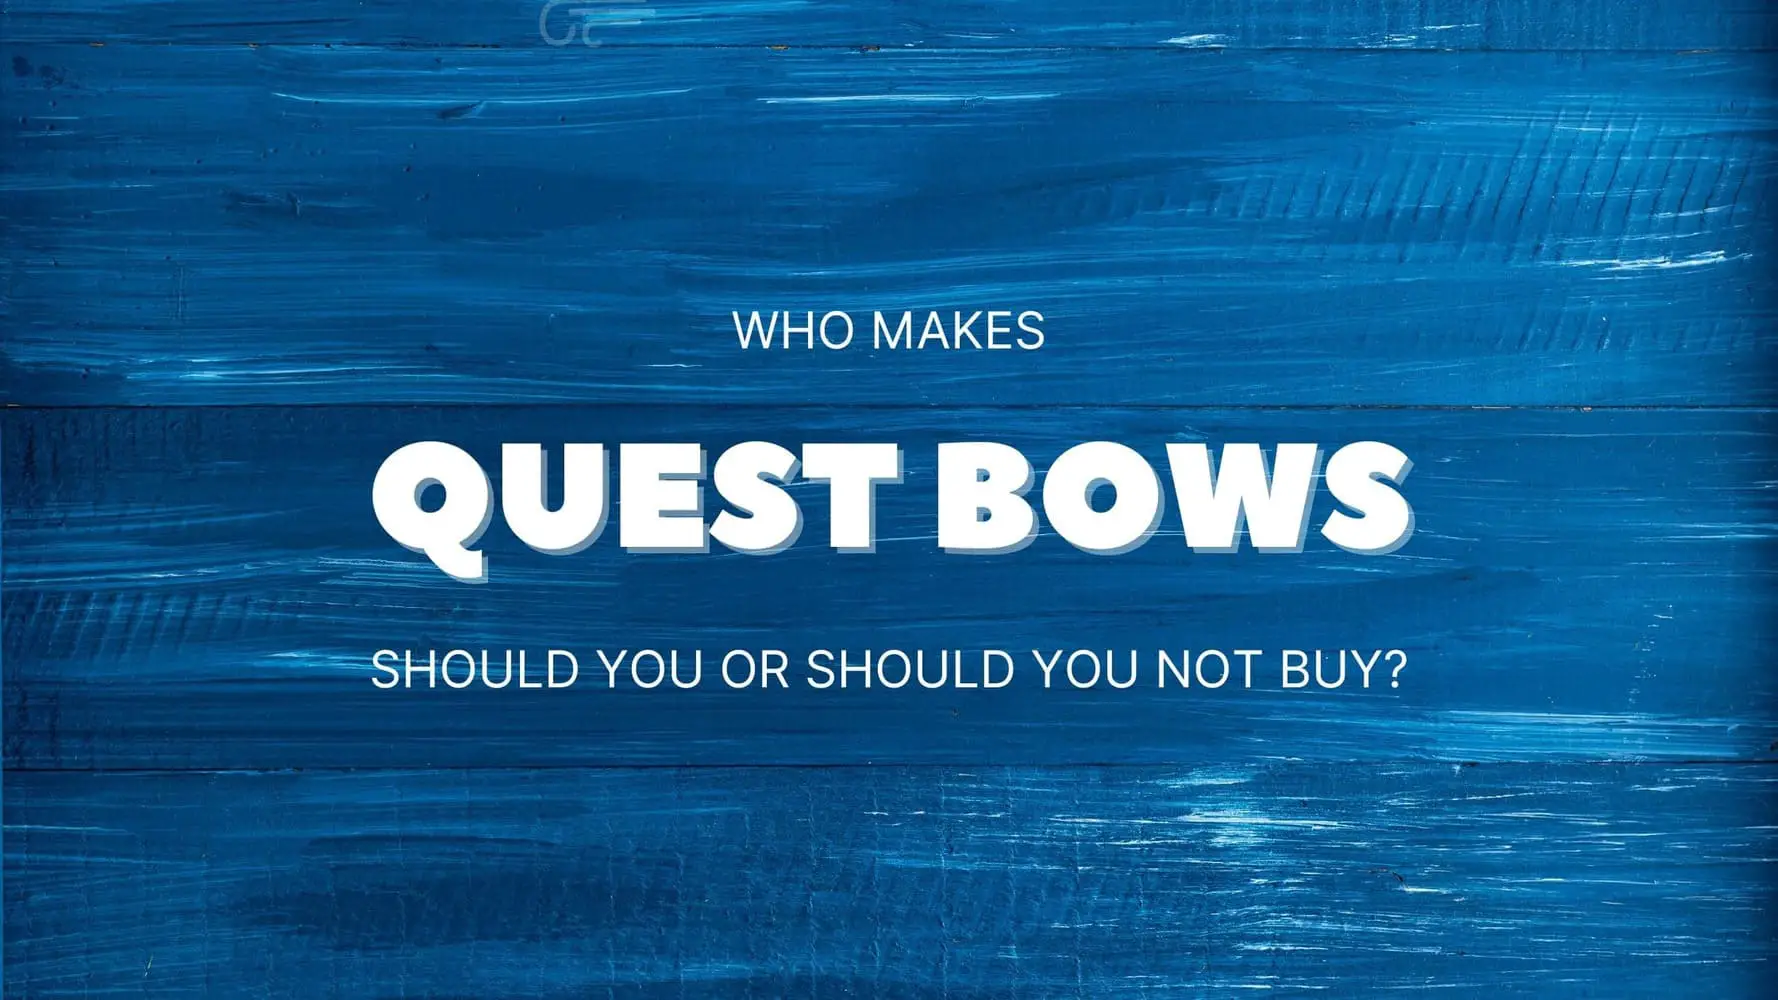 Who Makes Quest Bows